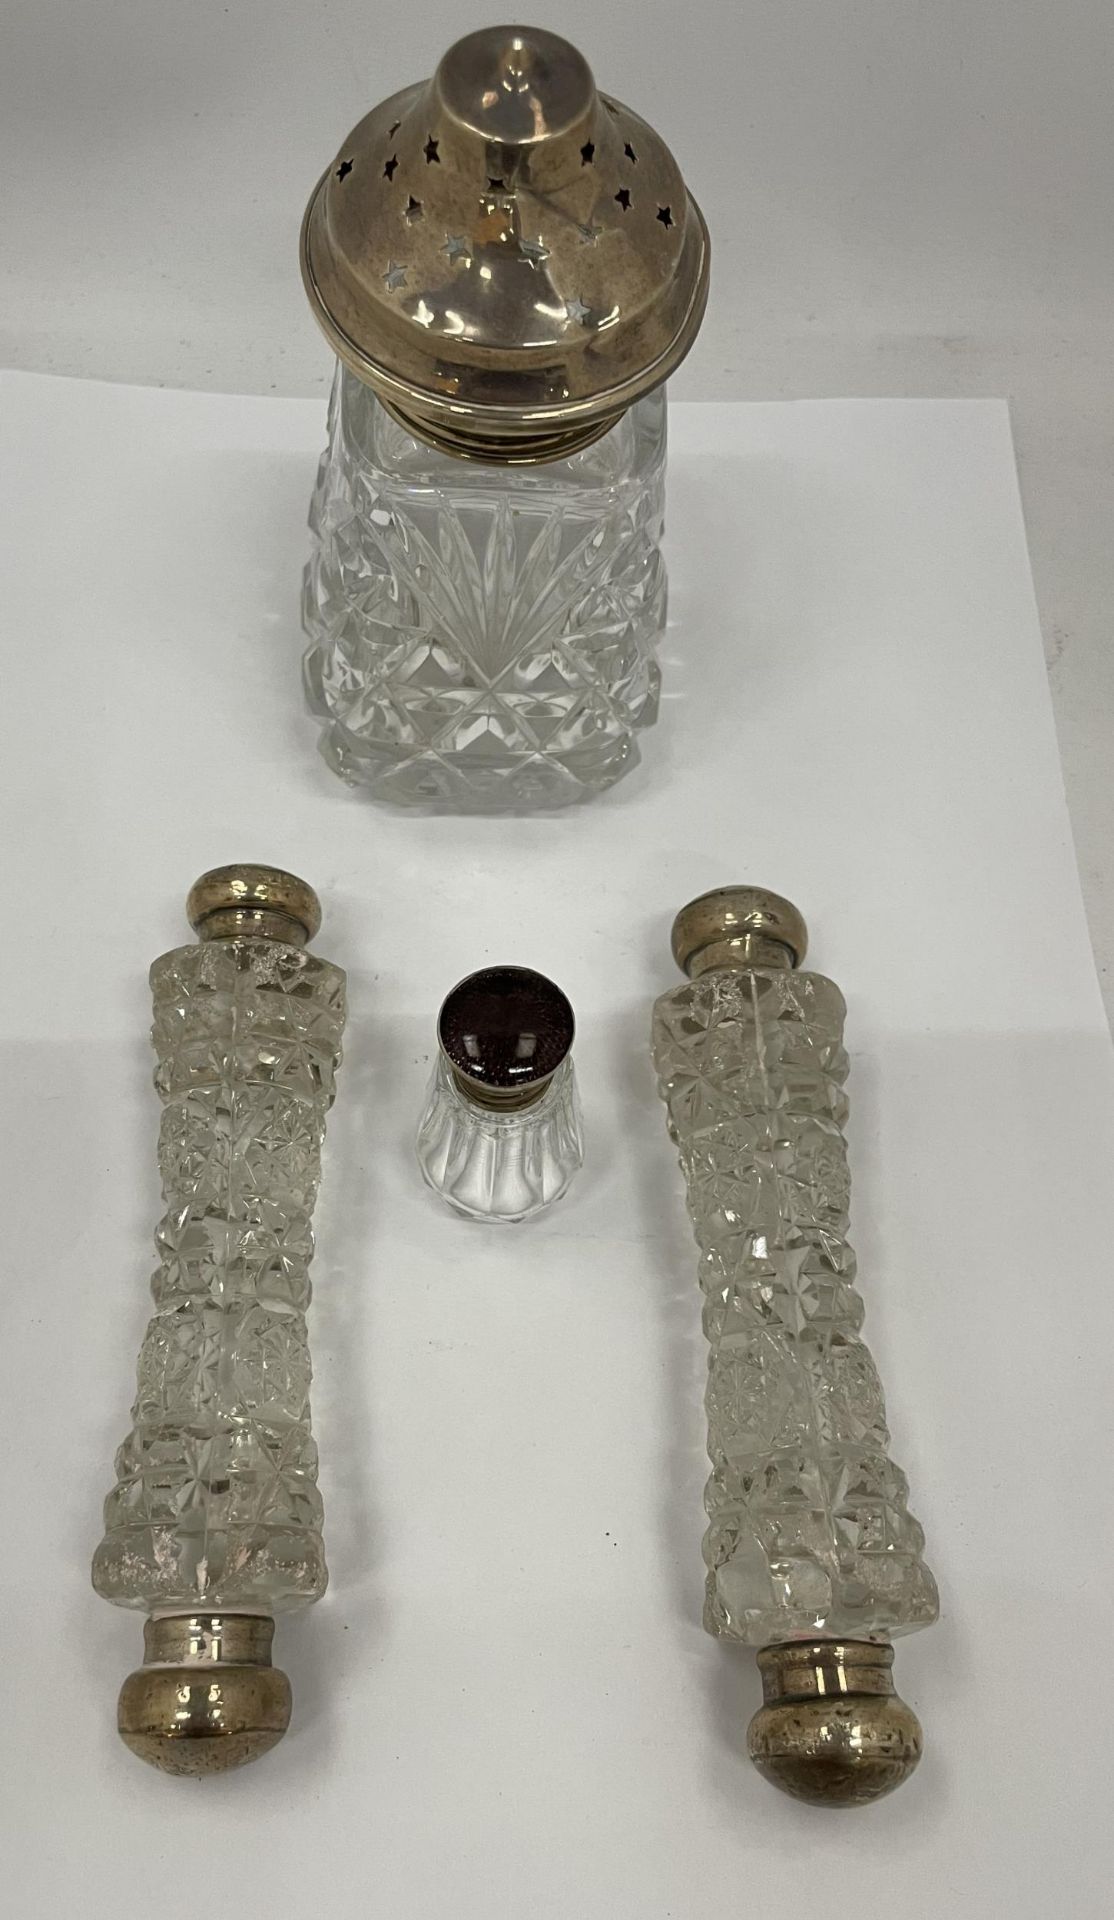 A COLLECTION OF CUT GLASS AND HALLMARKED SILVER ITEMS - SUGAR SIFTER, POT AND PAIR OF DOUBLE ENDED